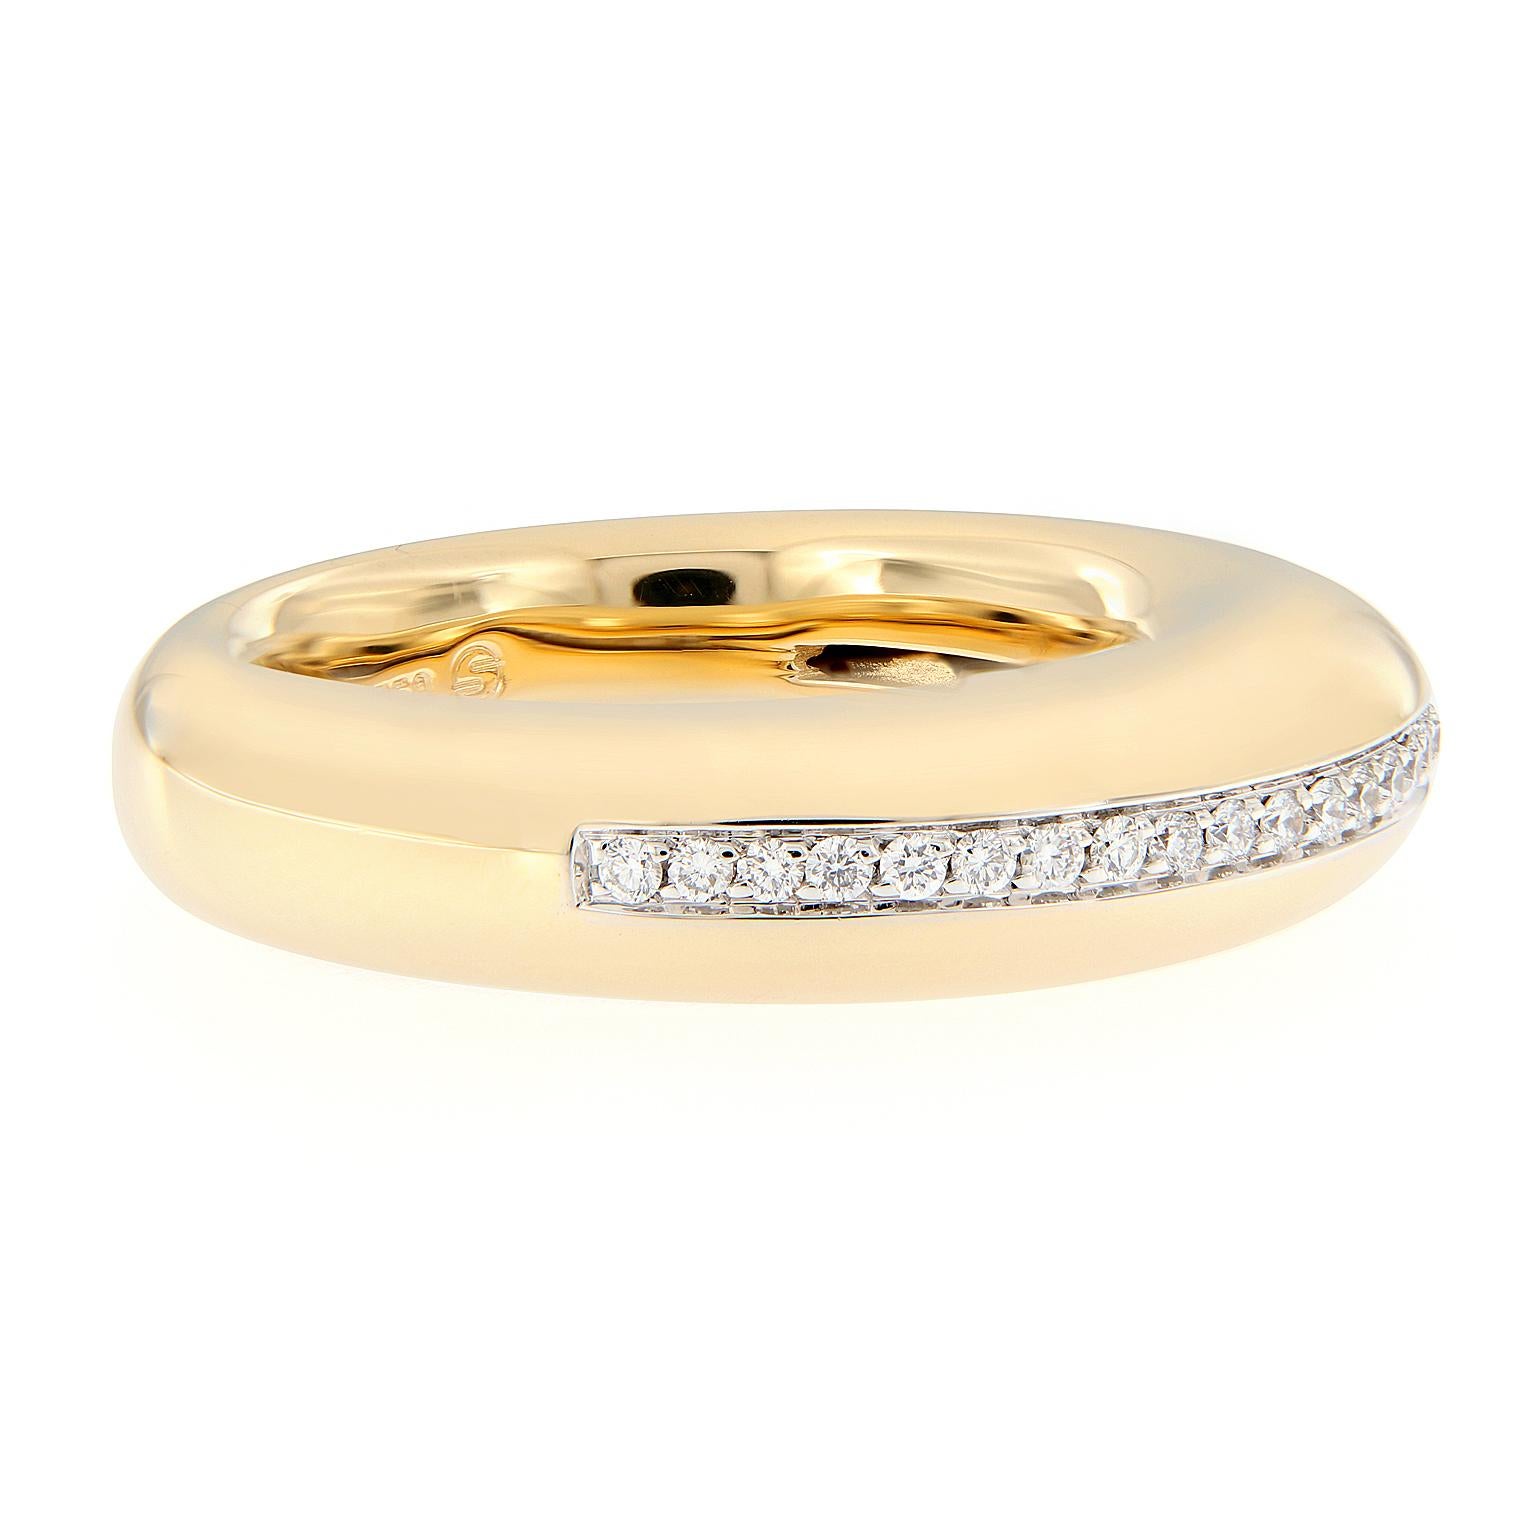 Contemporary Scheffel Diamond Dome Yellow Gold Band Ring